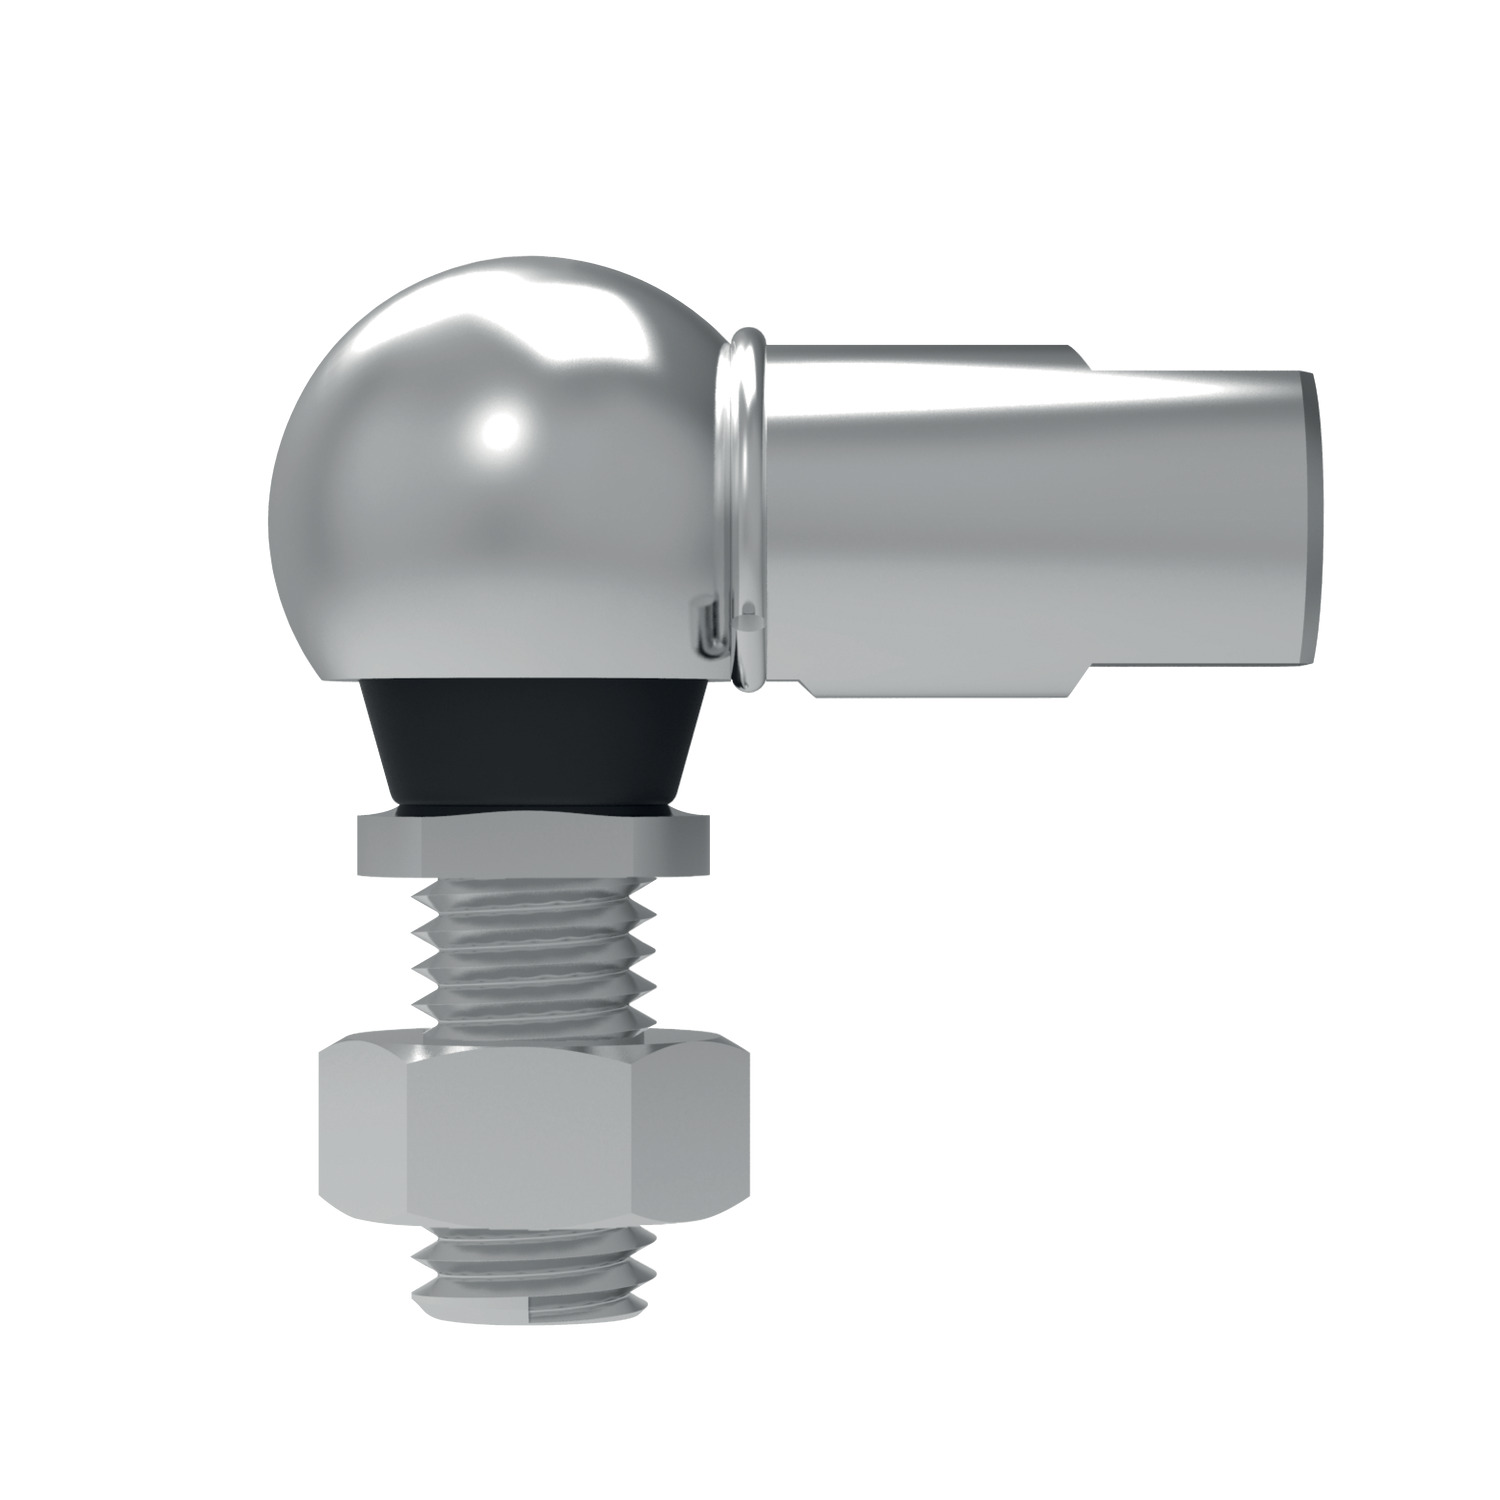 Product 65512, Stainless Ball and Socket Joint with flats on housing / 